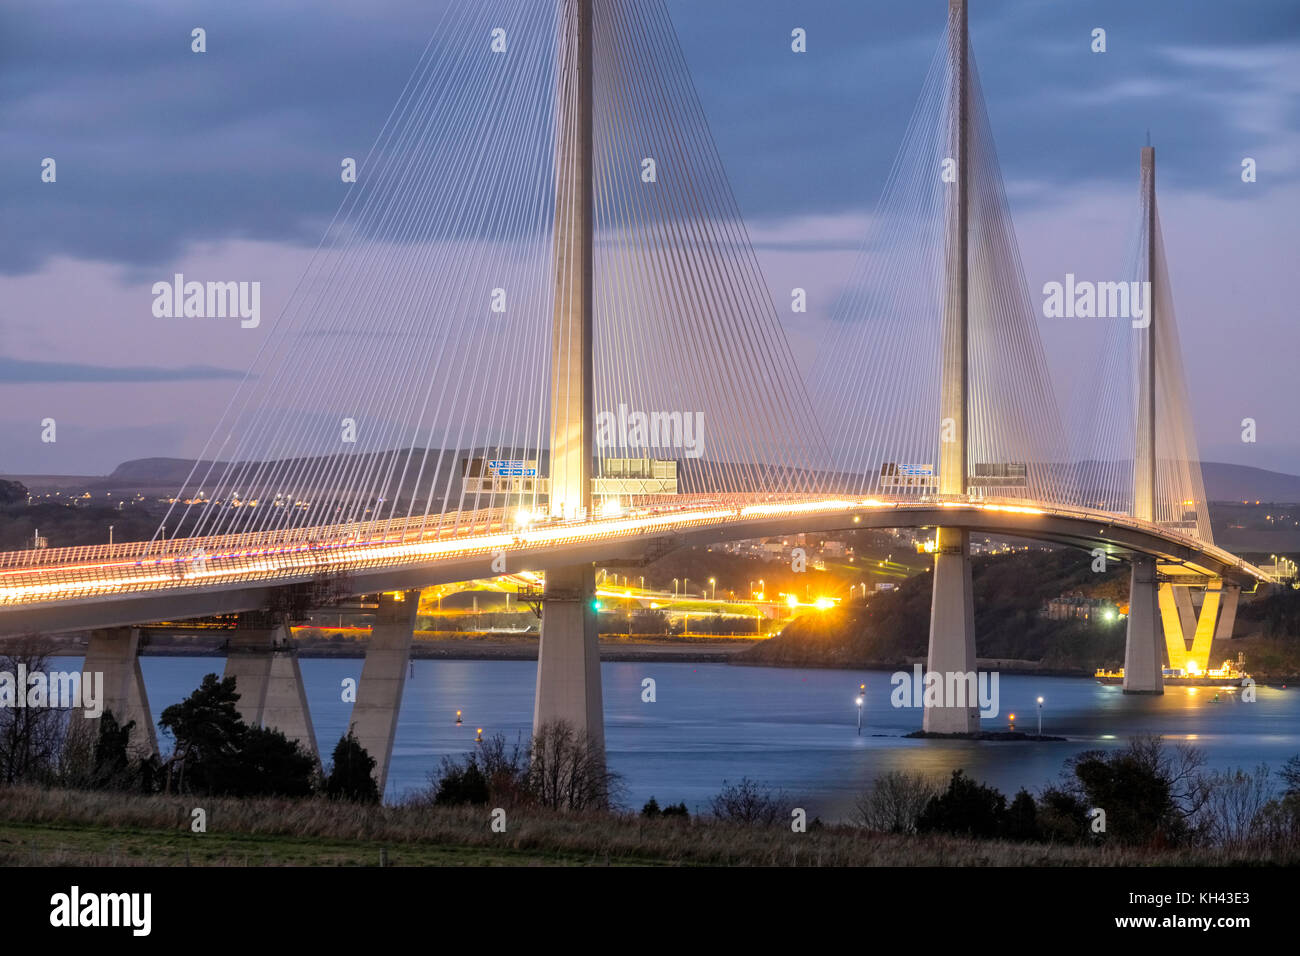 Evening view of new Queensferry Crossing bridge spanning Firth of Forth between West Lothian and Fife in Scotland, United Kingdom Stock Photo